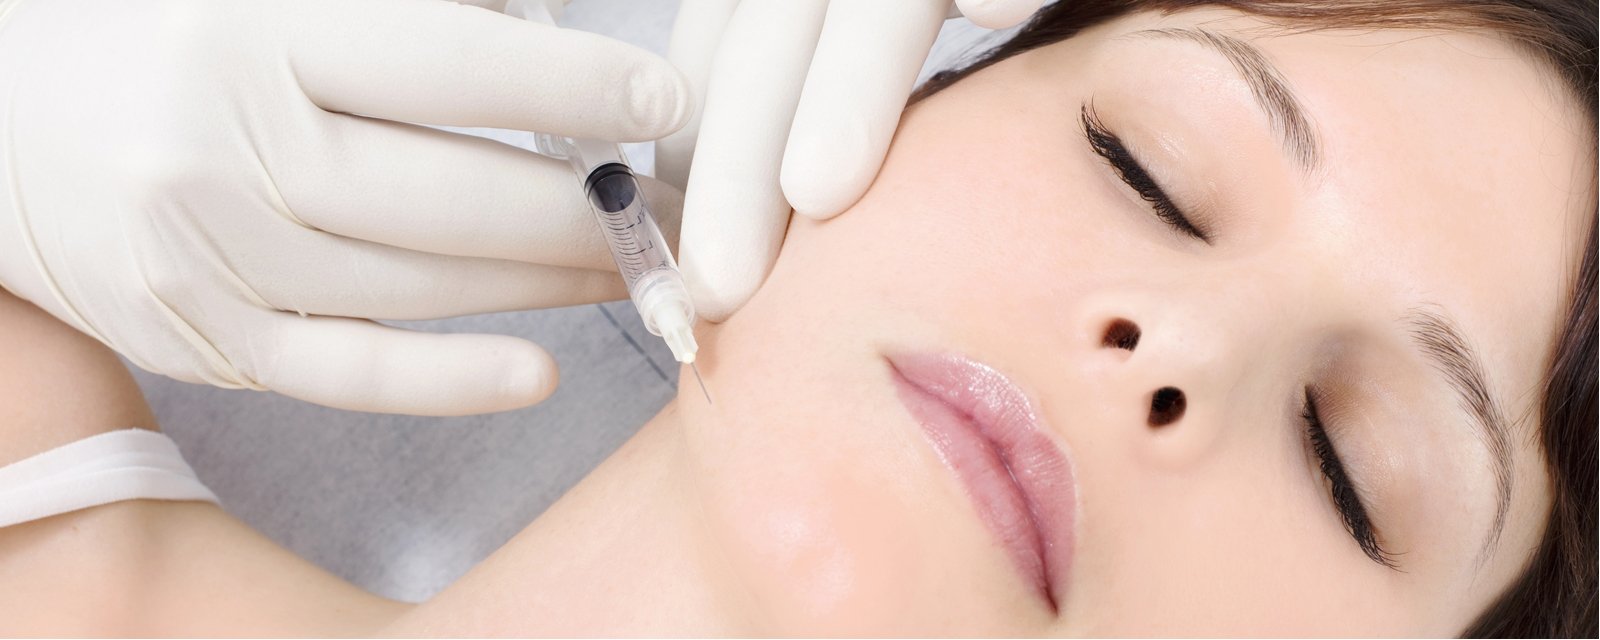 best acne treatment clinic in delhi, botox clinic treatment in delhi, dermal fillers treatment in delhi,dermal fillers treatment, dermal fillers, dermal fillers before and after